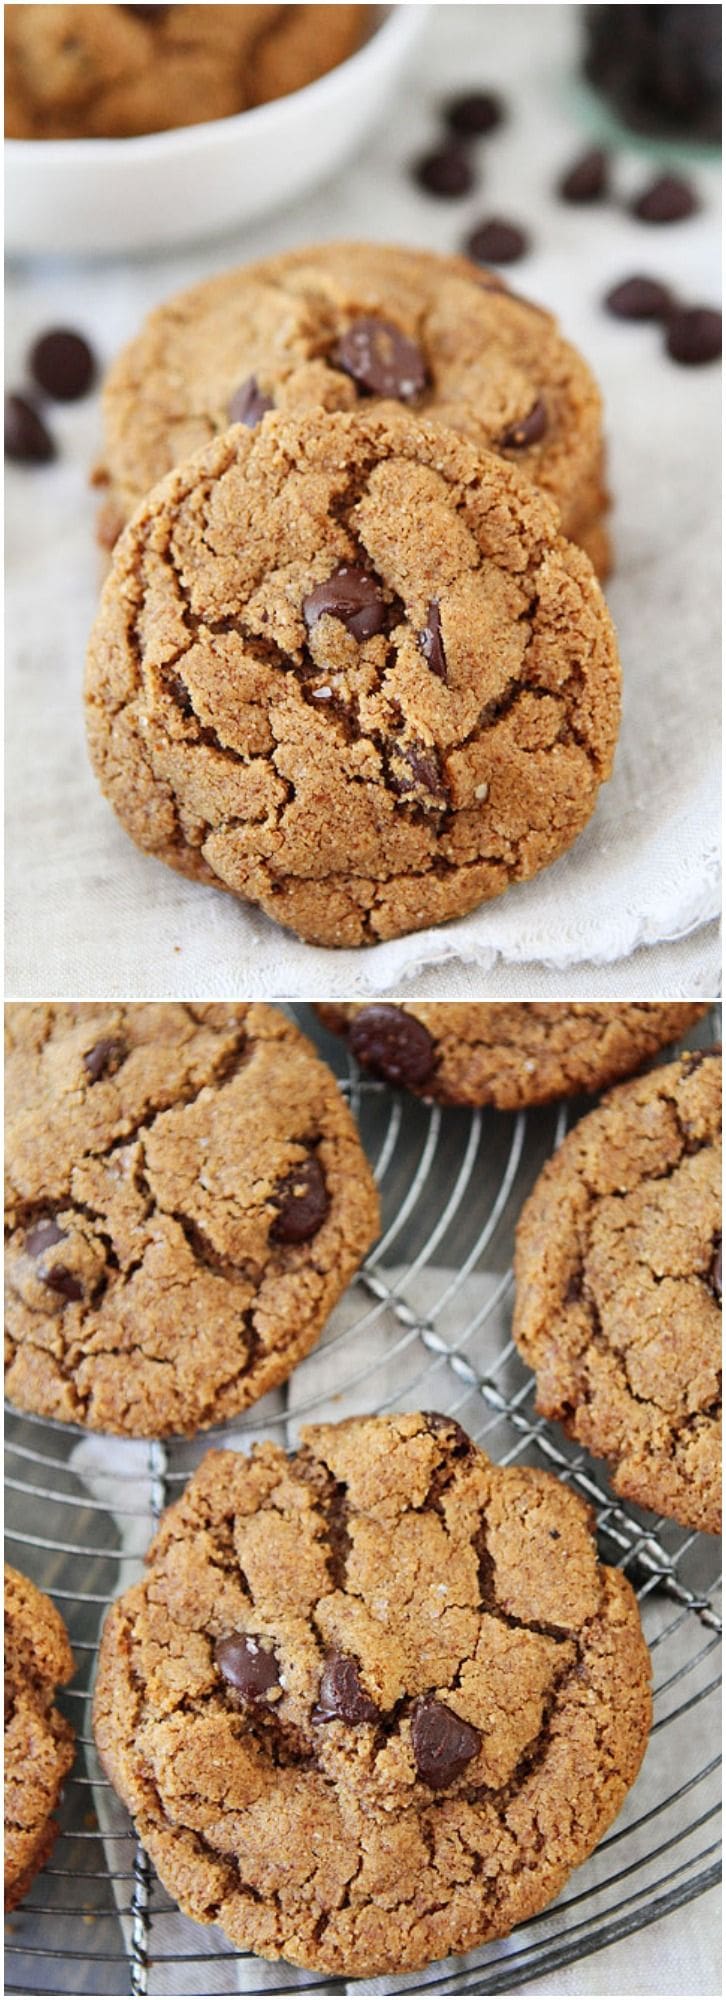 Flourless Almond Butter Chocolate Chip Cookies on twopeasandtheirpod.com These gluten-free cookies are amazing! Easy to make too!